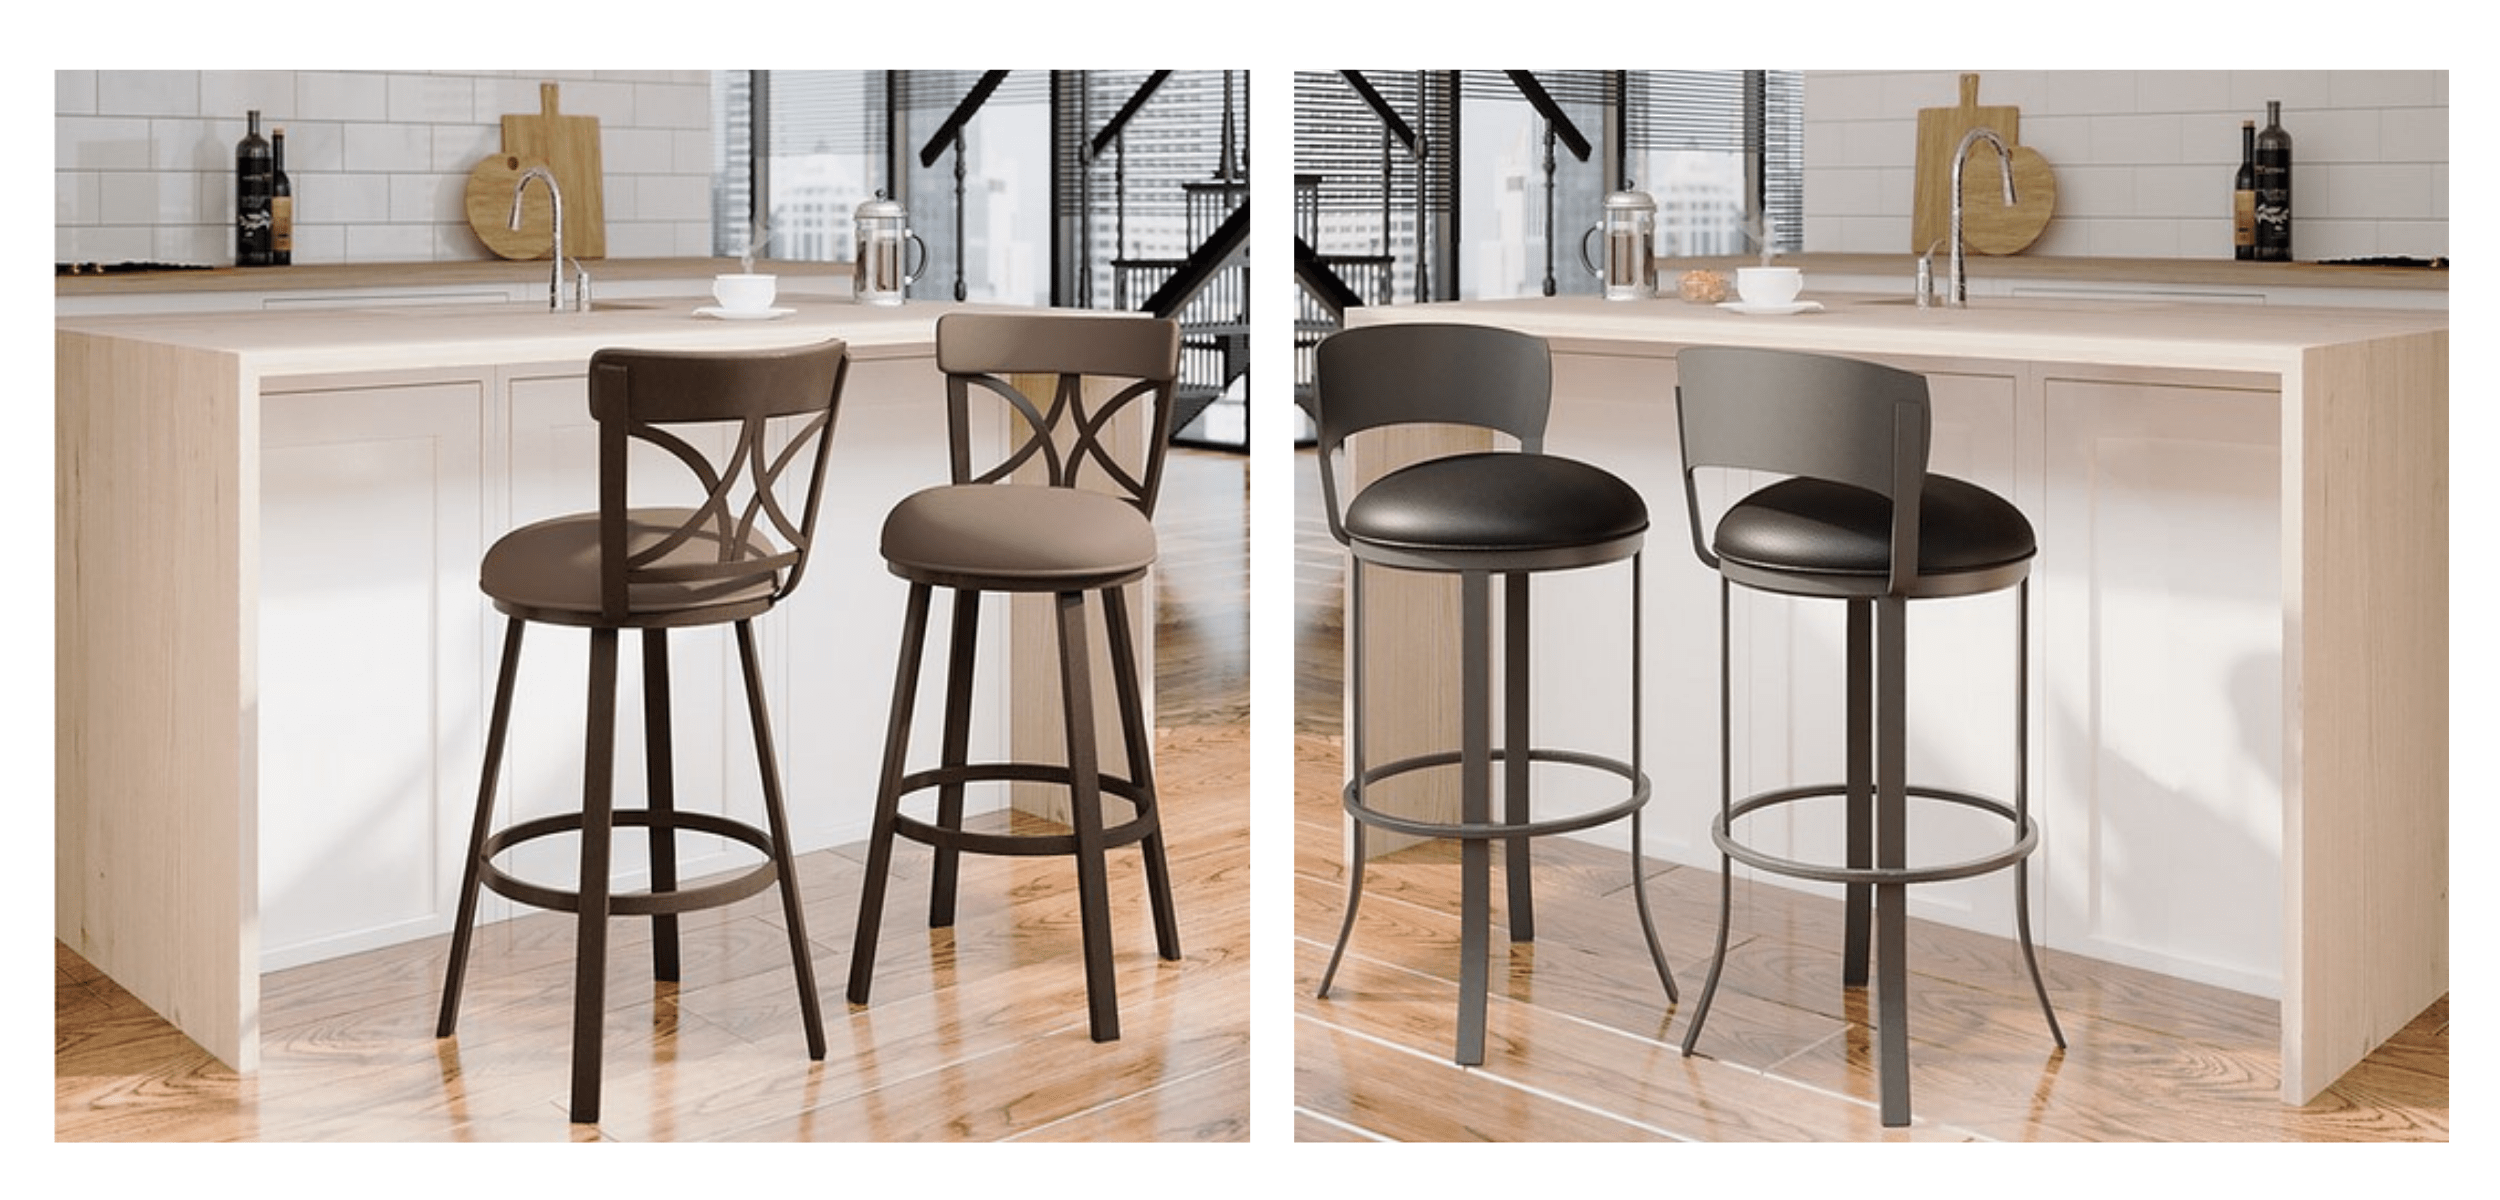 What kind of stool is good for kitchen island?